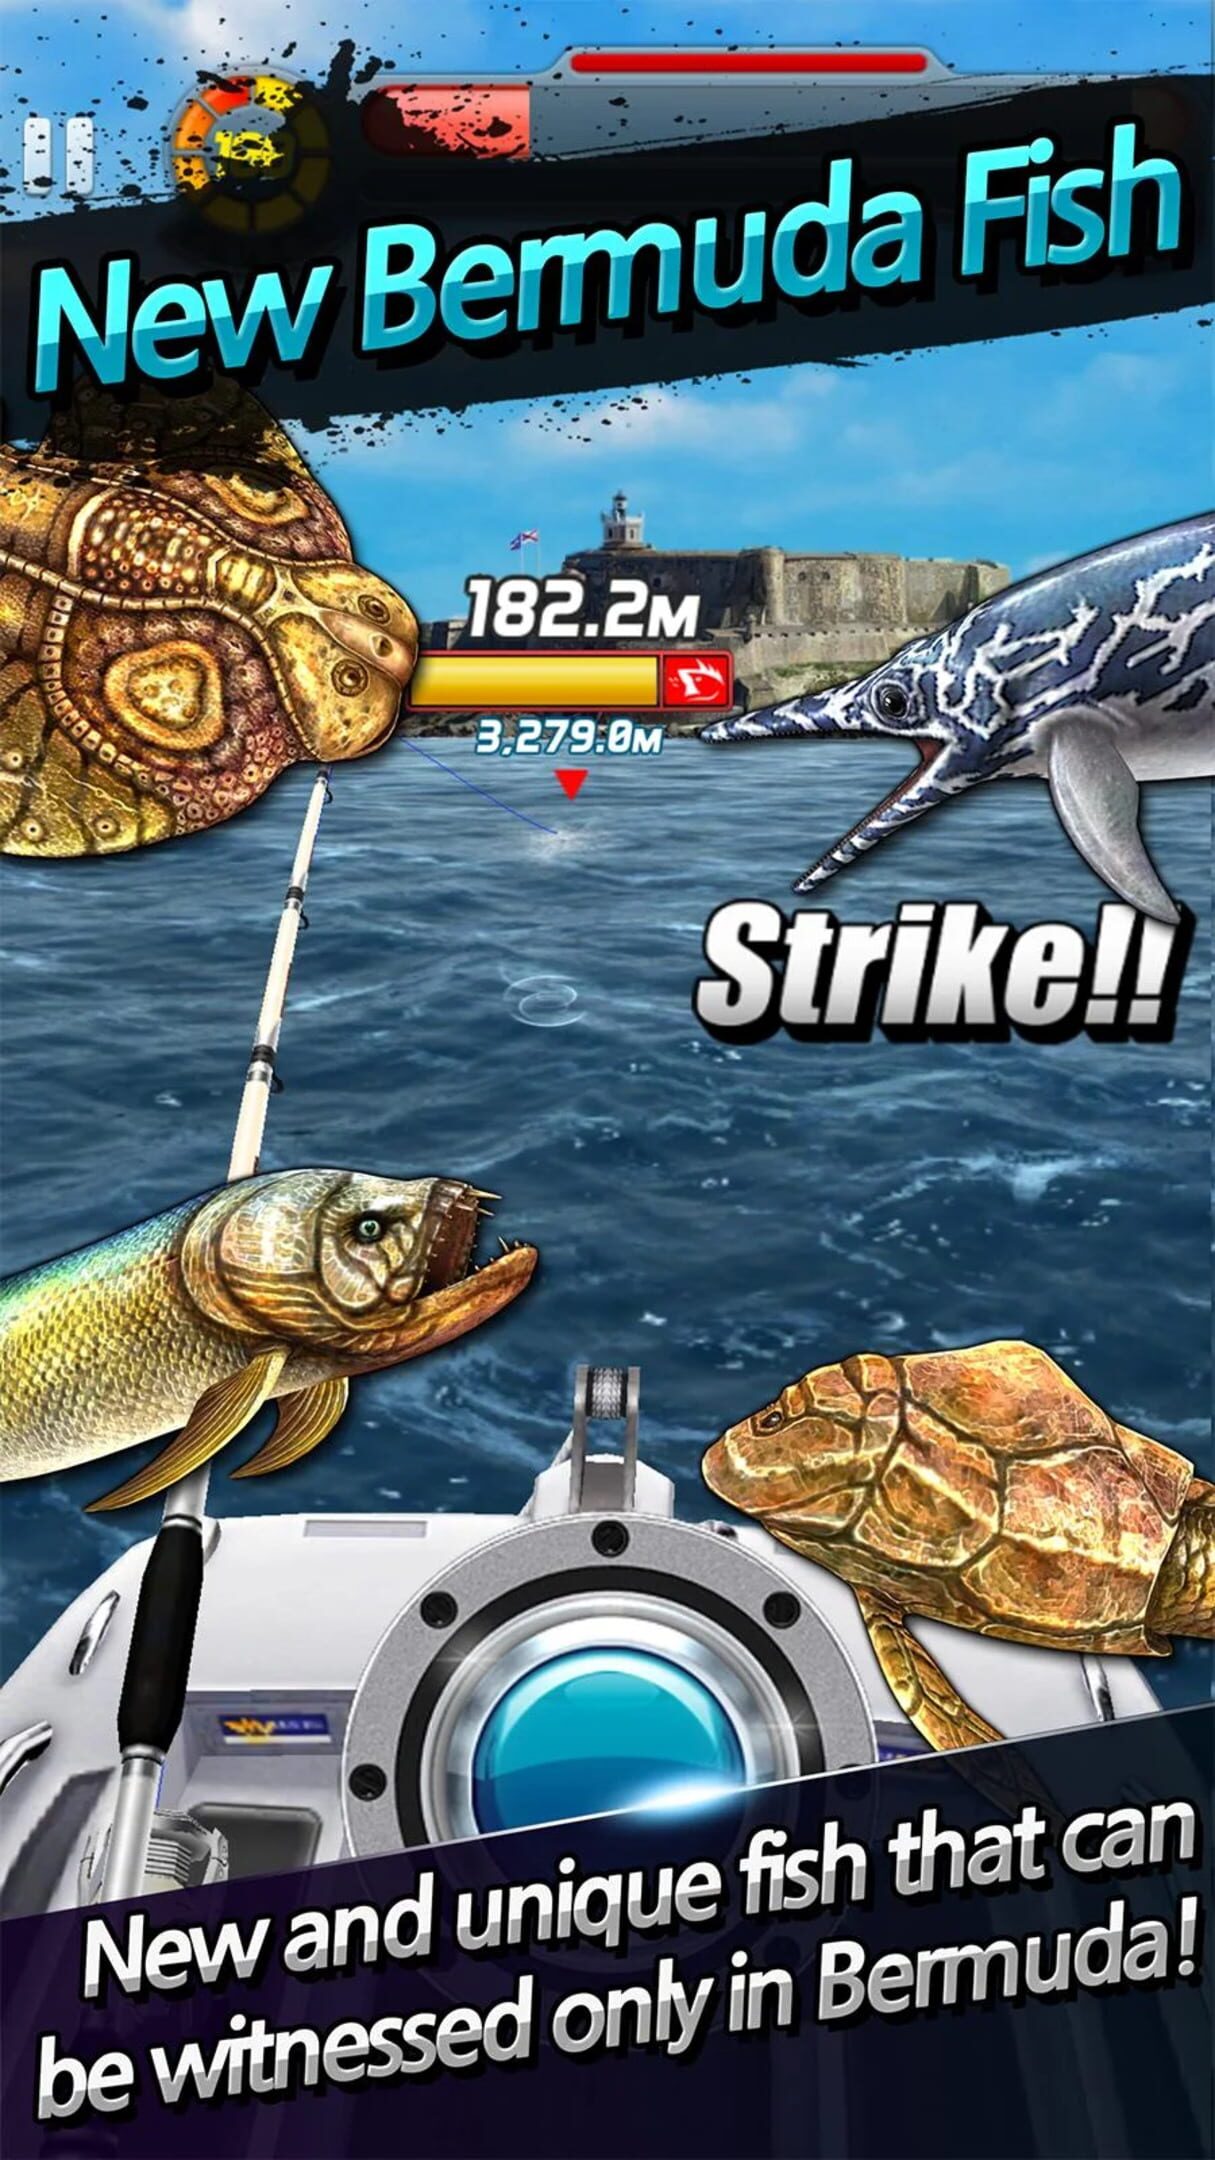 Ace Fishing: Wild Catch News, Guides, Walkthrough, Screenshots, and Reviews  - GameRevolution